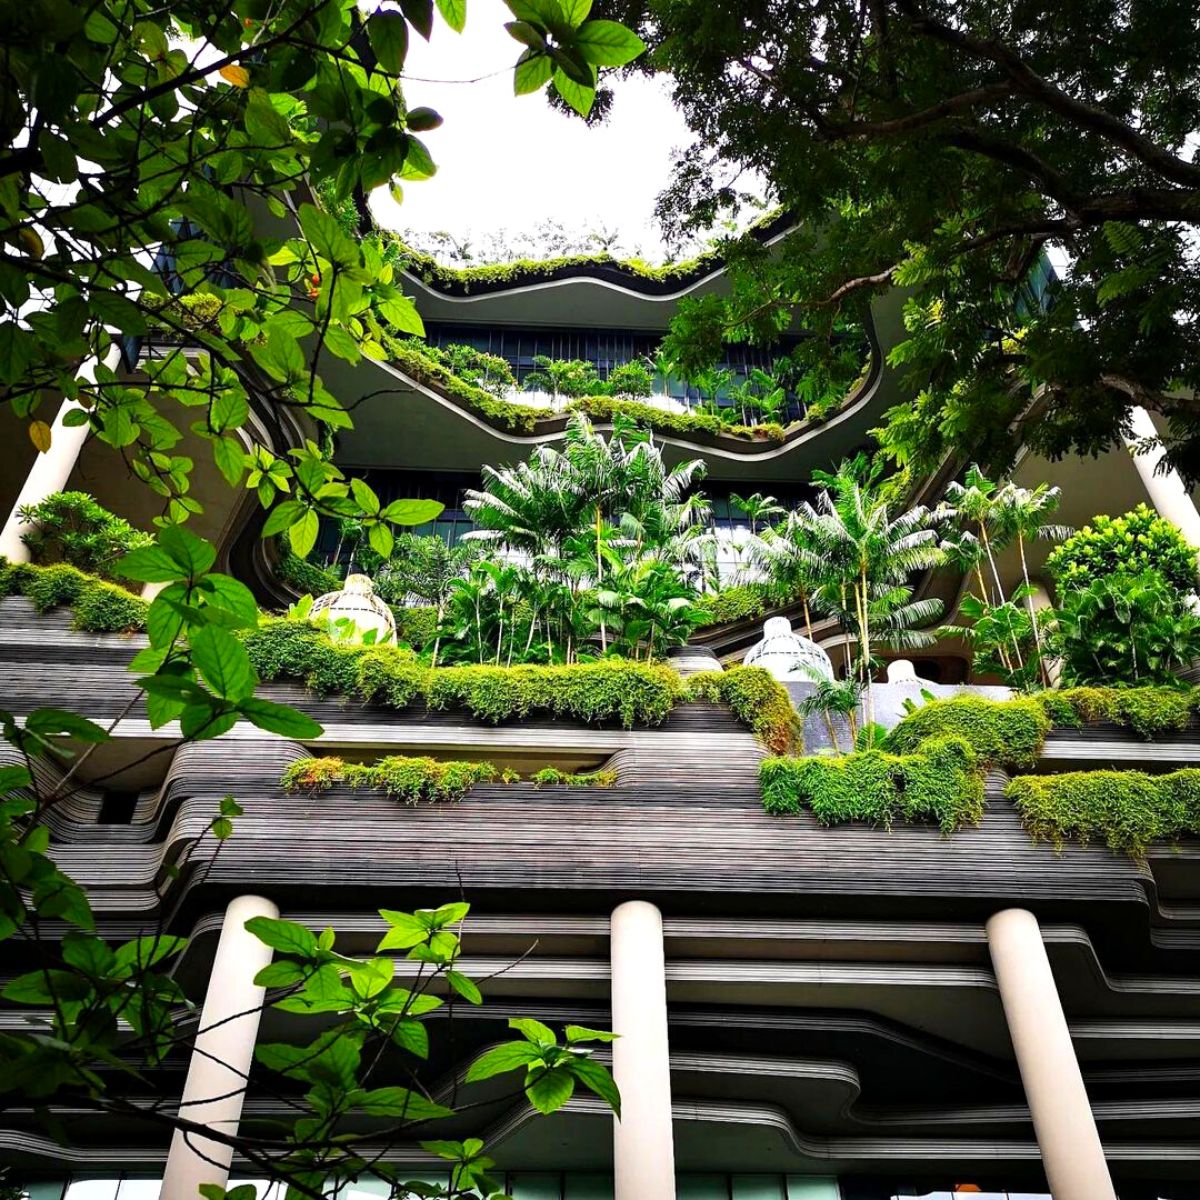 Parkroyal hotel in Singapore is a green paradise